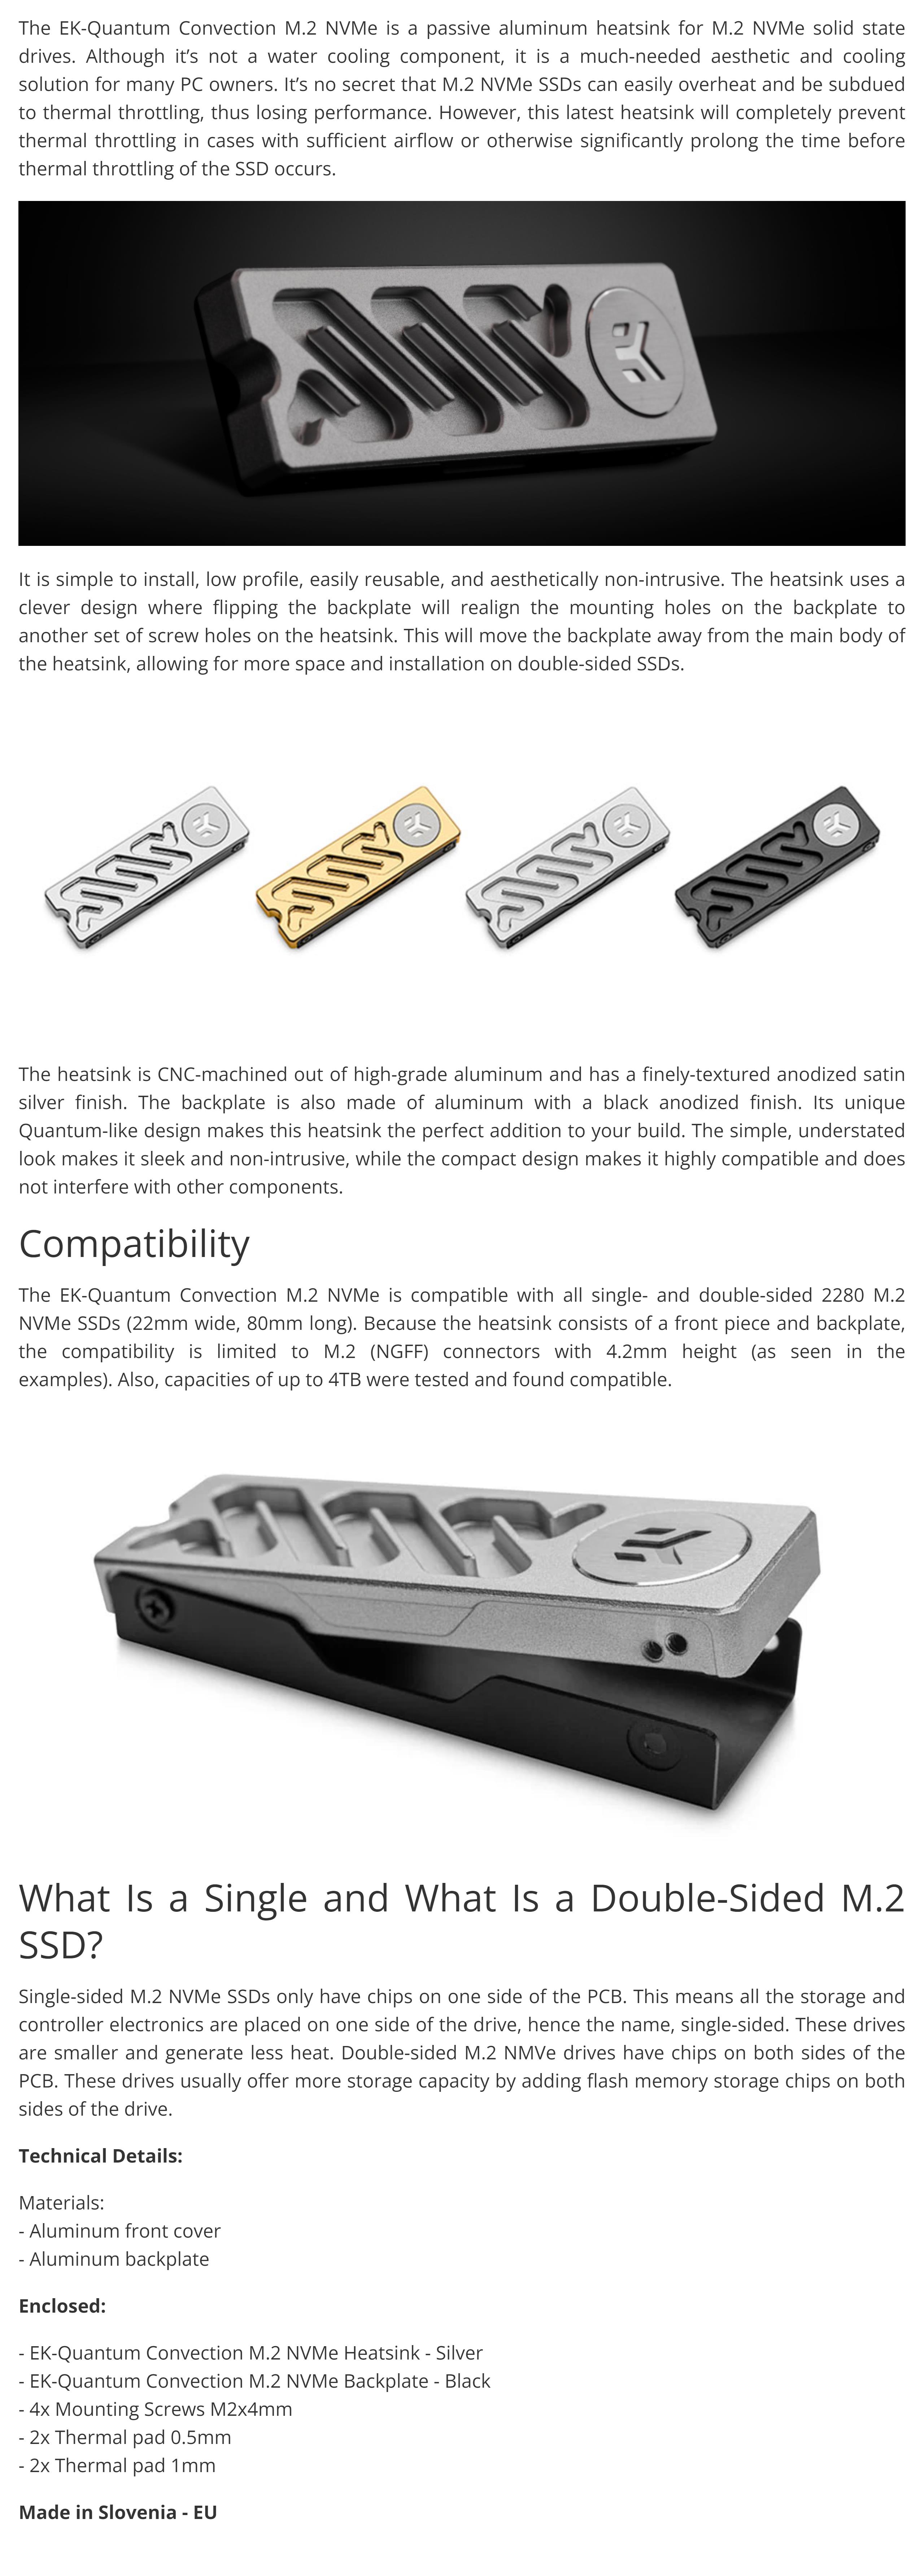 A large marketing image providing additional information about the product EK Quantum Convection M.2 NVMe Heatsink - Black - Additional alt info not provided